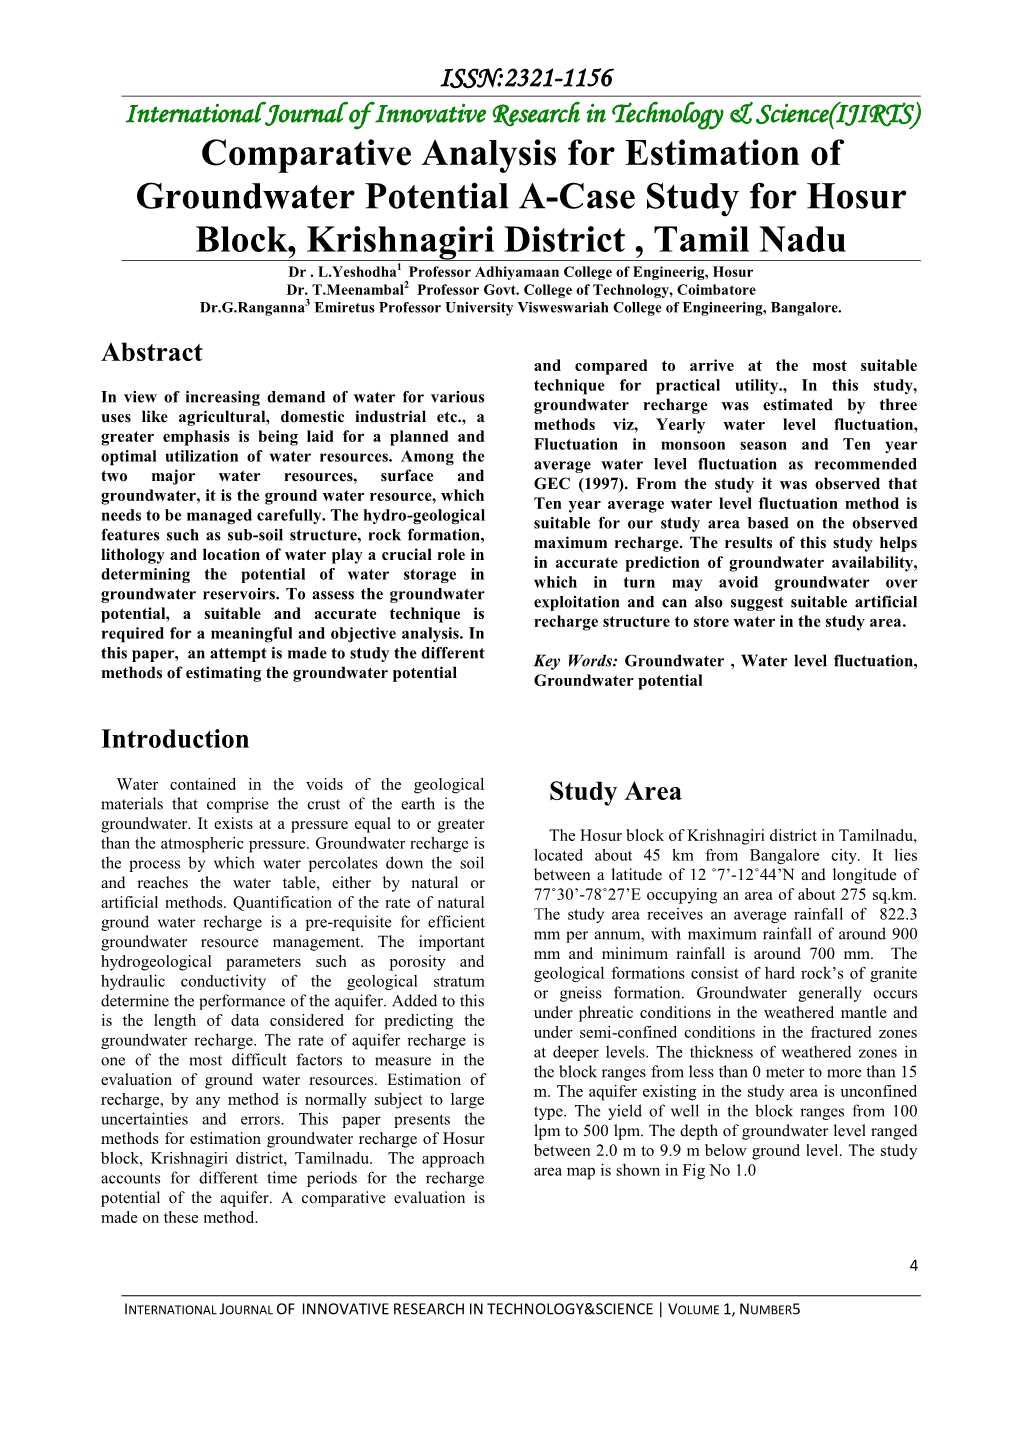 Comparative Analysis for Estimation of Groundwater Potential A-Case Study for Hosur Block, Krishnagiri District , Tamil Nadu Dr